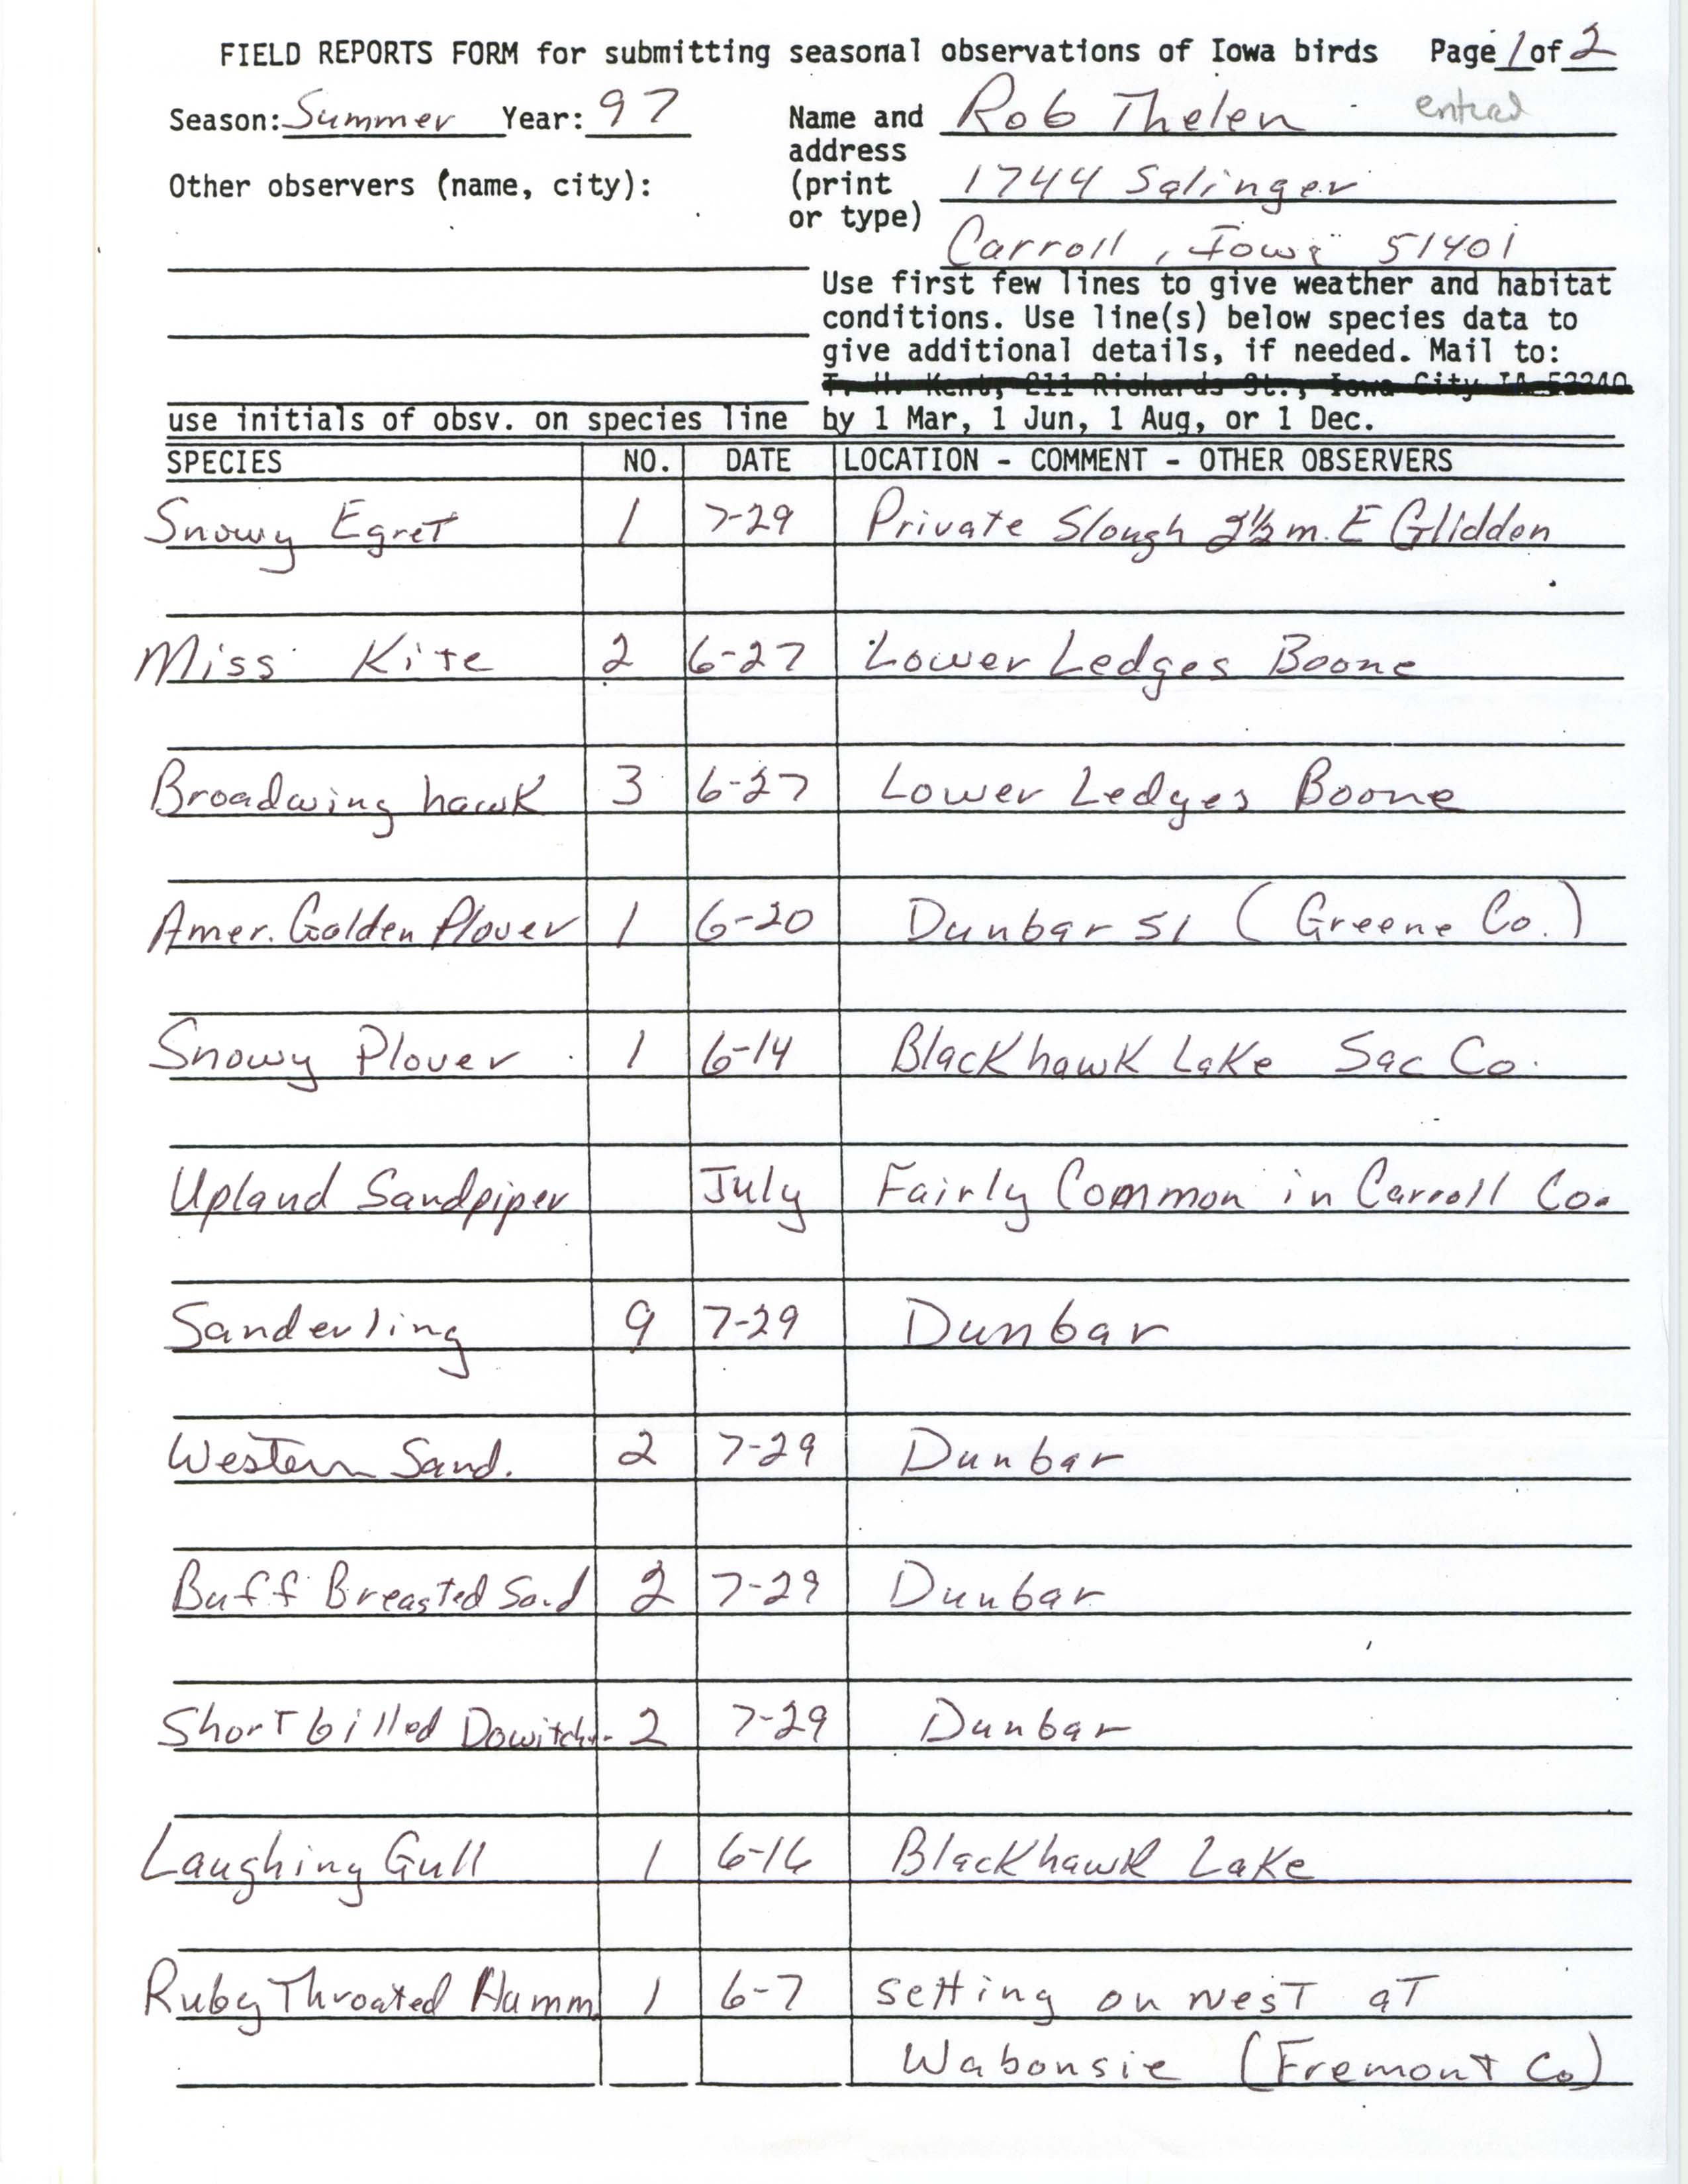 Field reports form for submitting seasonal observations of Iowa birds, Rob Thelen, summer 1997